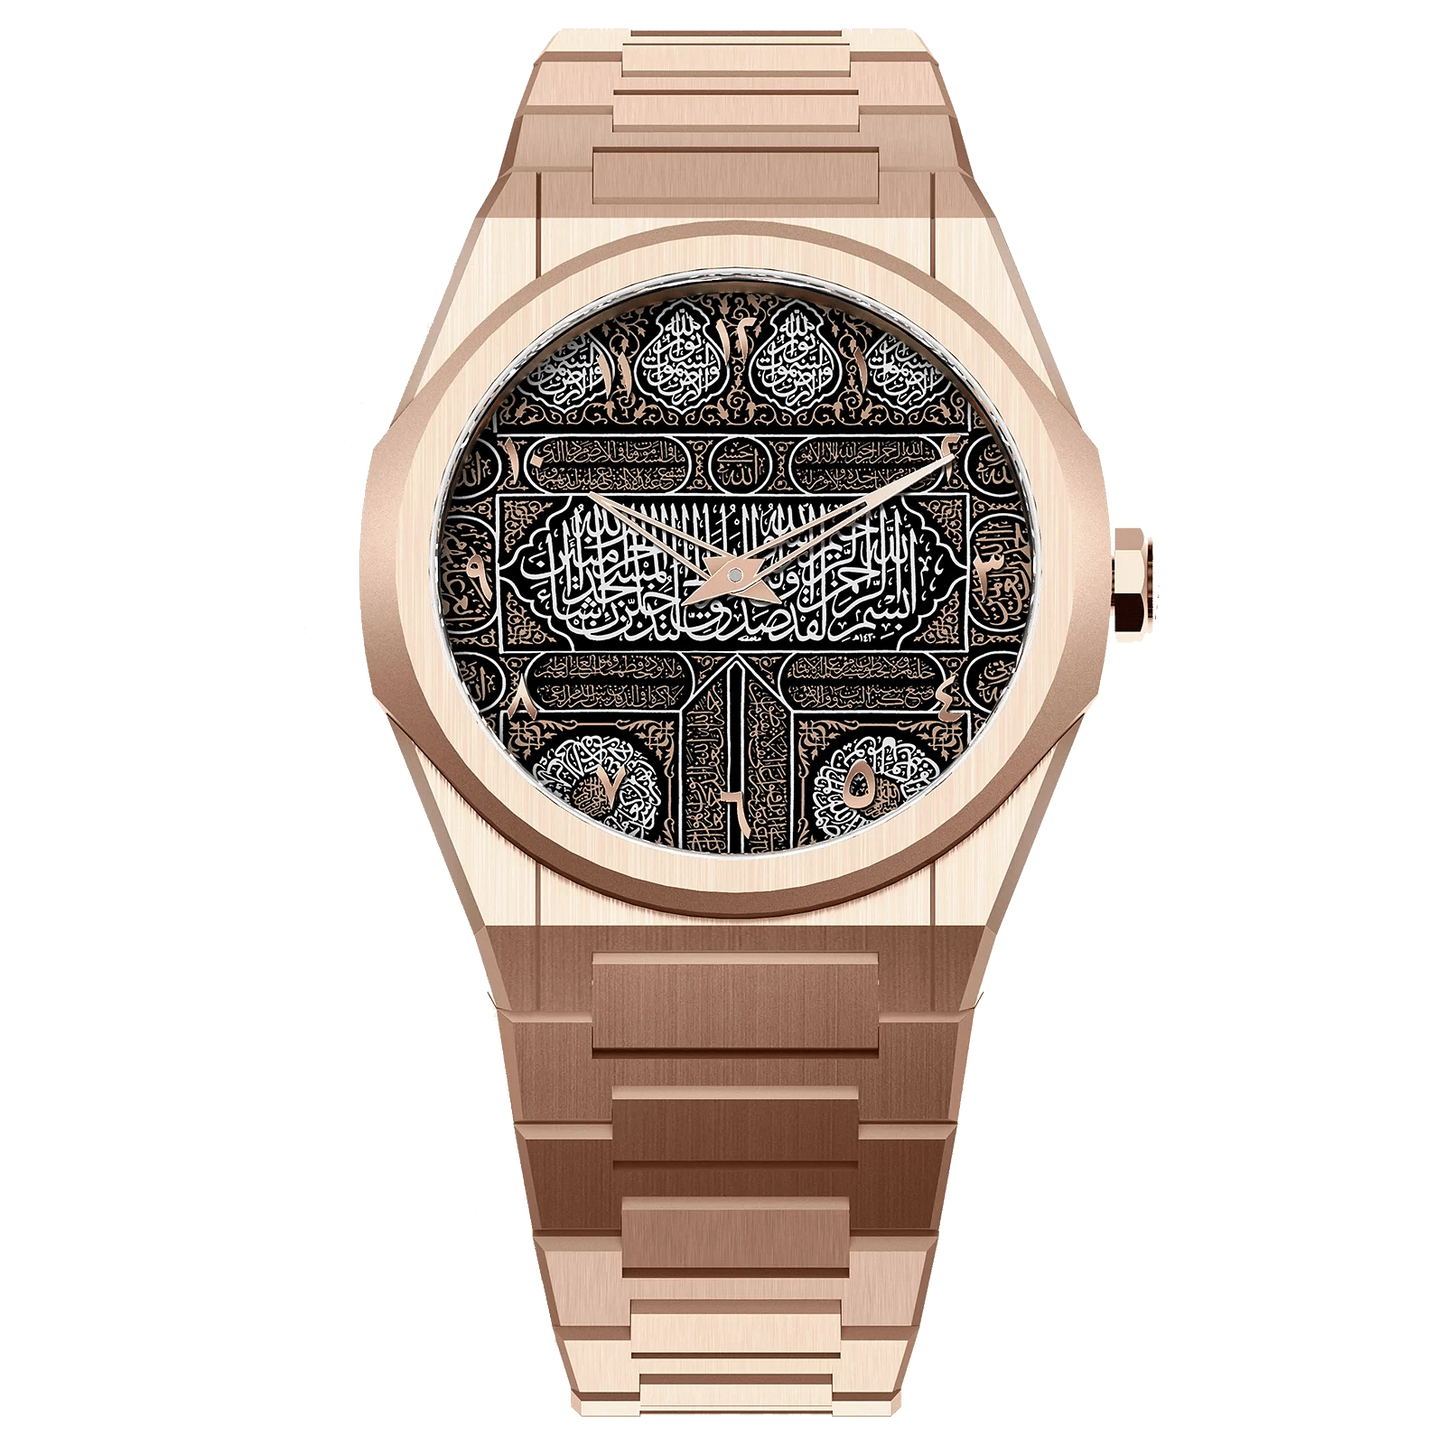 PWG Mecca Rose Gold 0/200 Limited Edition